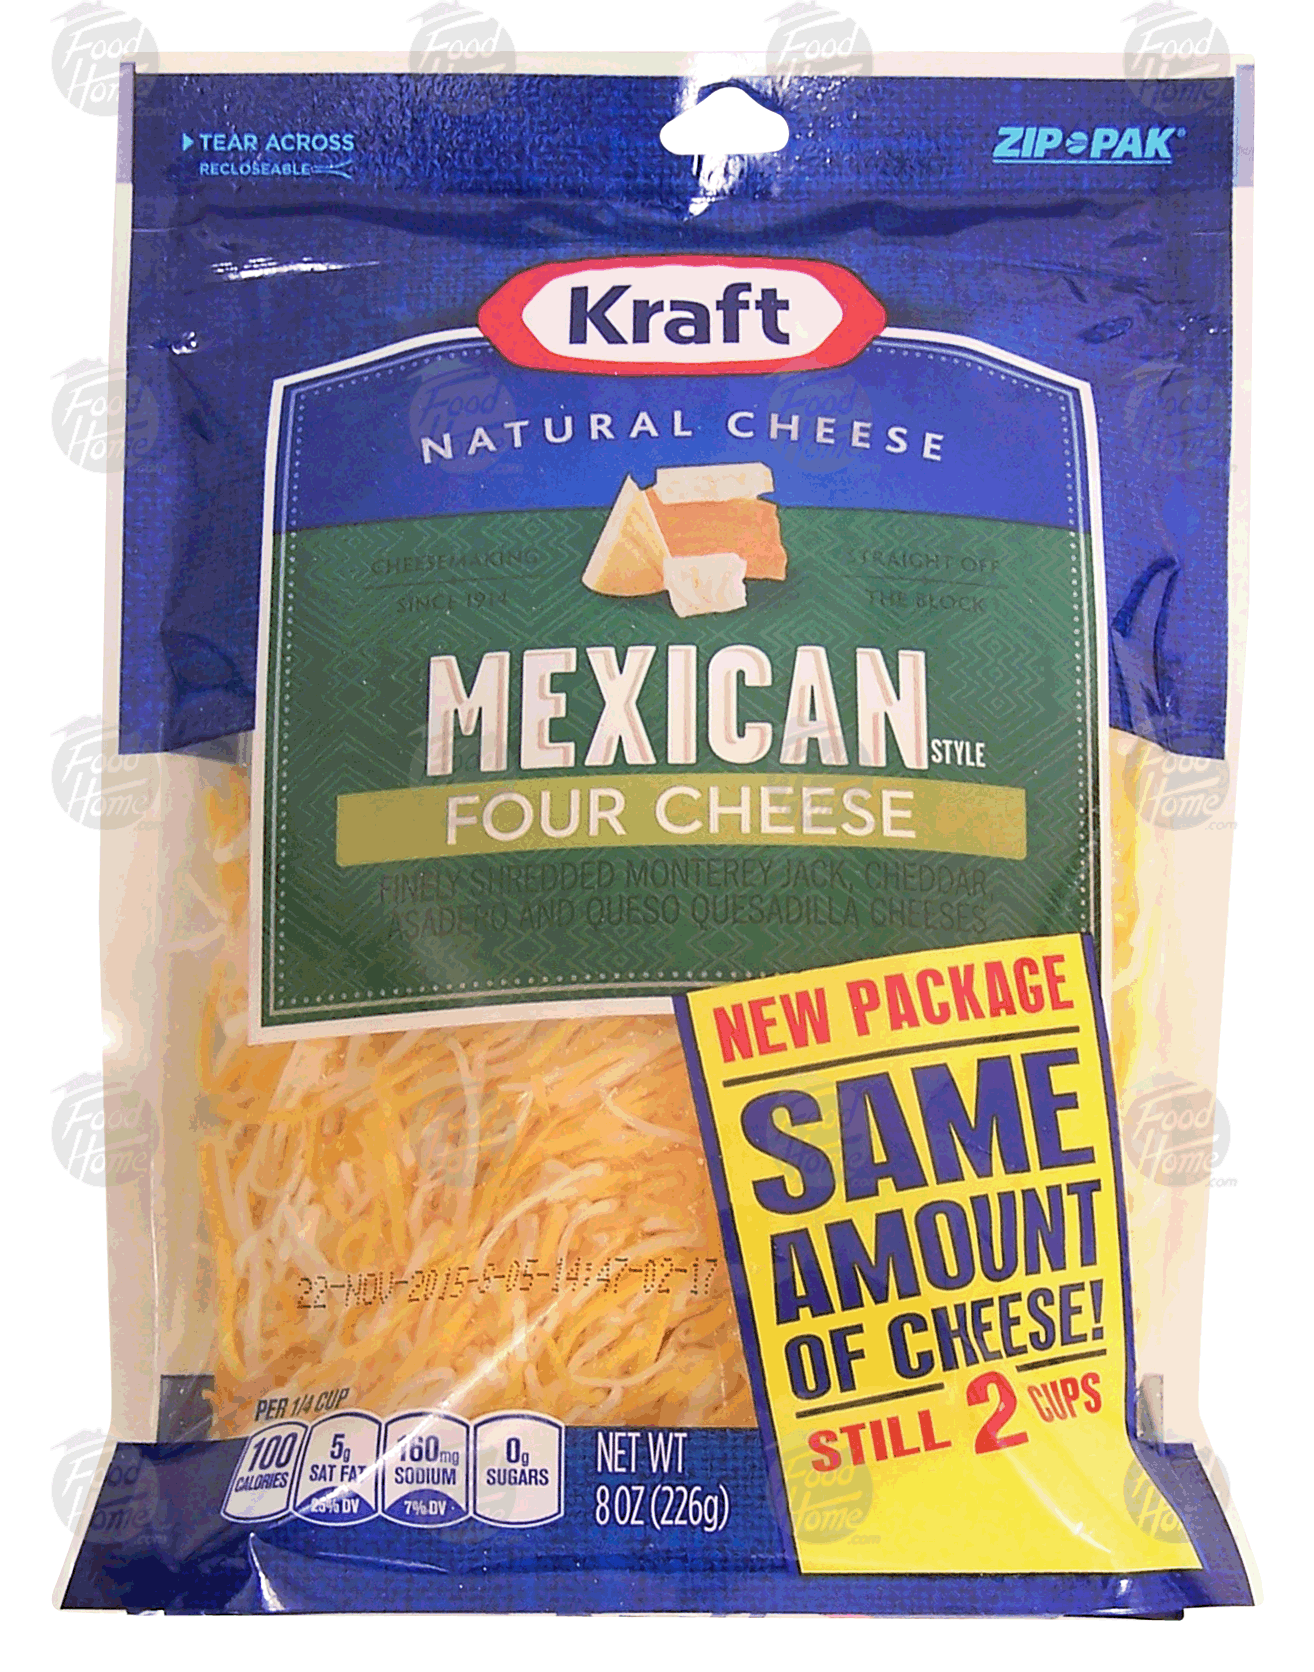 Kraft Natural Cheese mexican style, four cheese, finely shredded monterey jack, cheddar, asadero and queso quesadilla Full-Size Picture